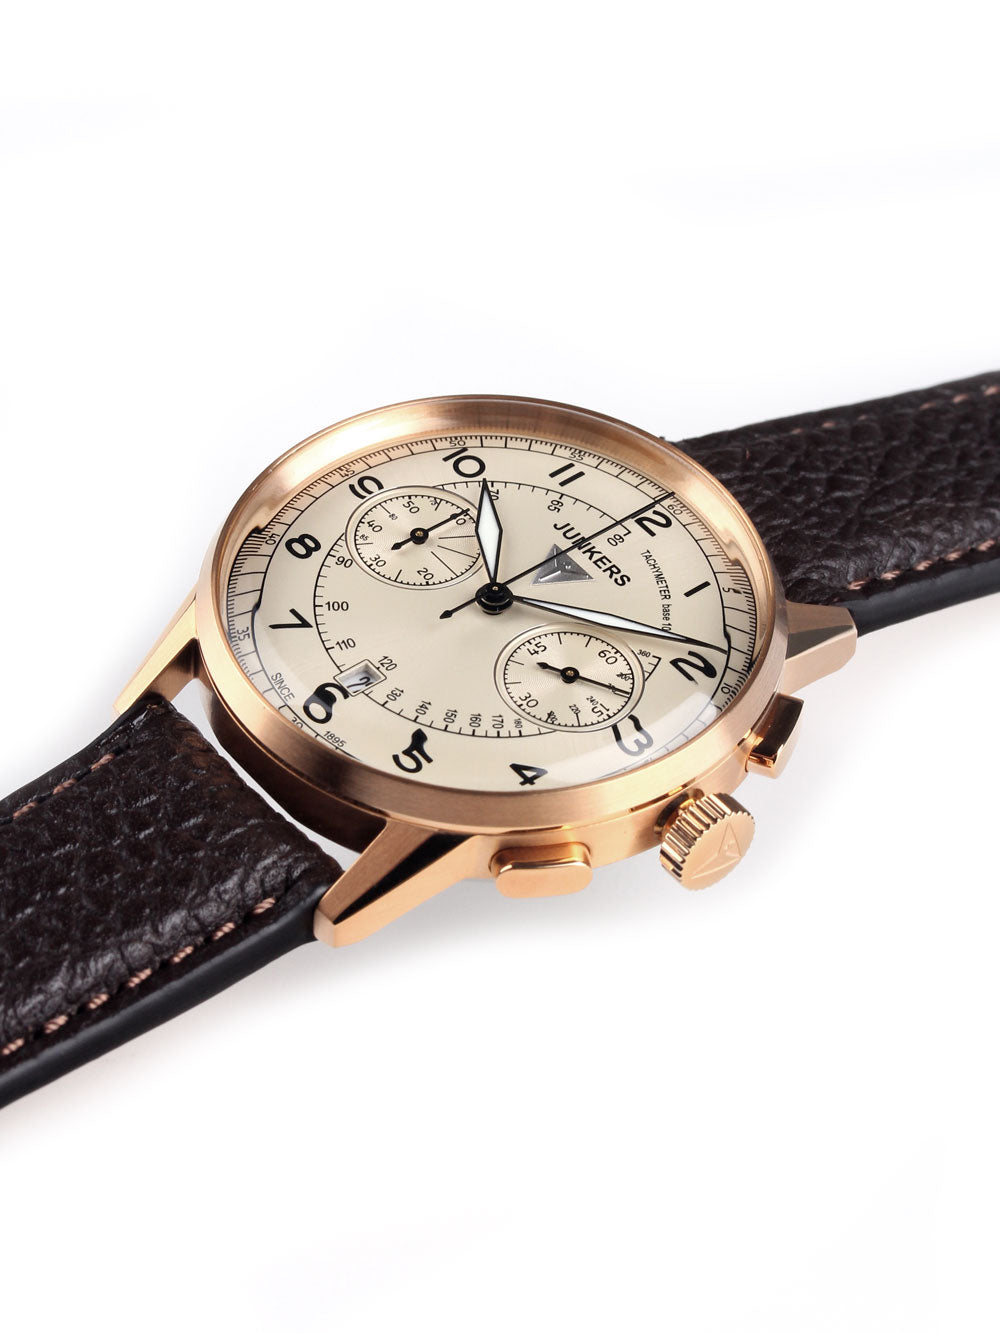 Junkers G38 6972-1 Chronograph golden brown 42 mm 100M